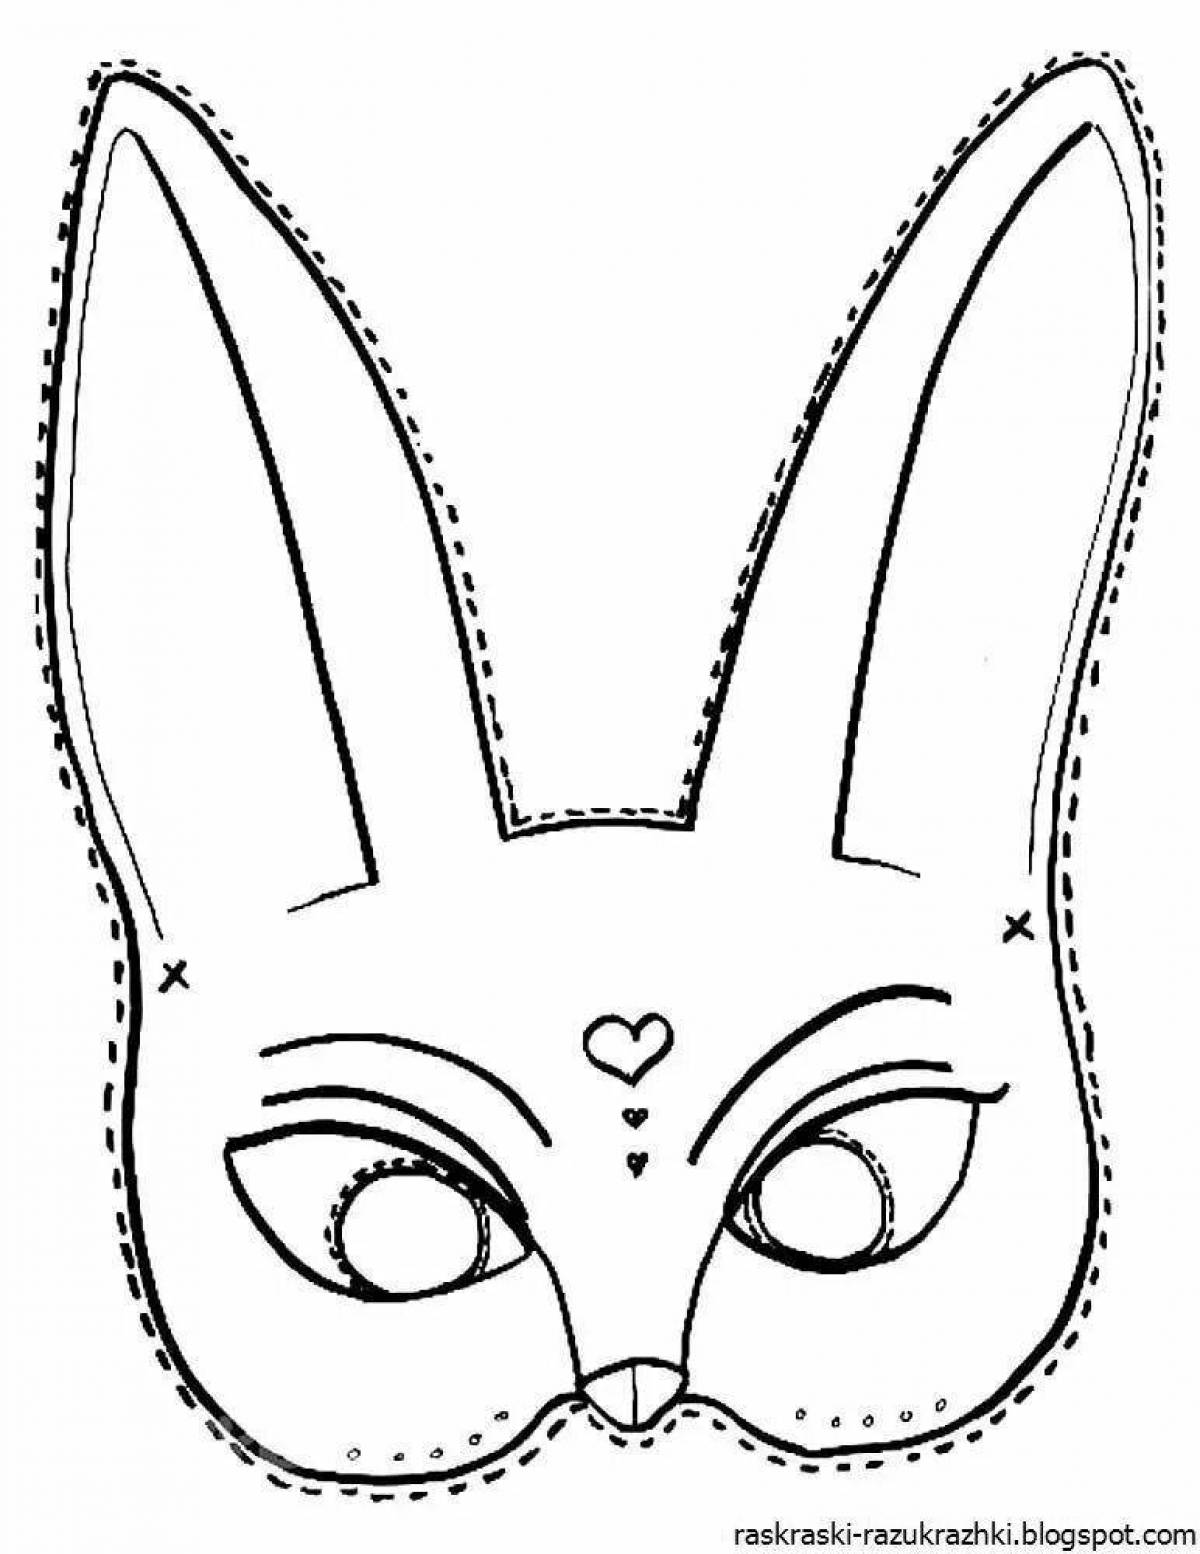 Playful mask coloring page